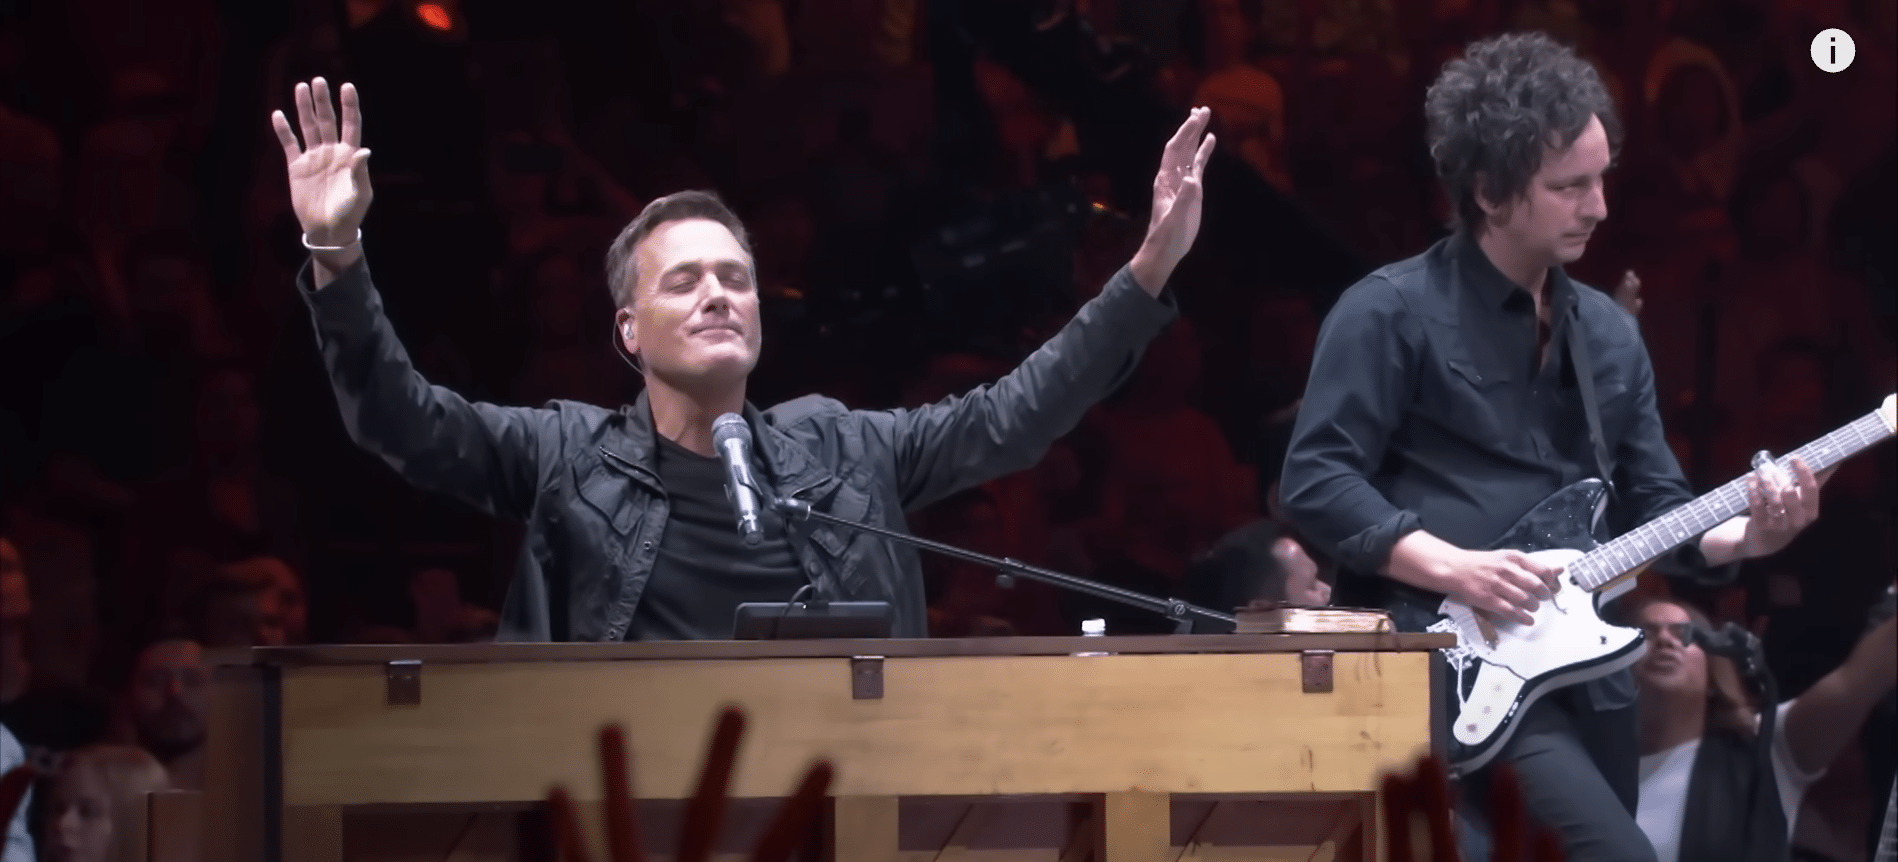 What we prayed for Is happening’: Singer Michael W. Smith reacts to revivals